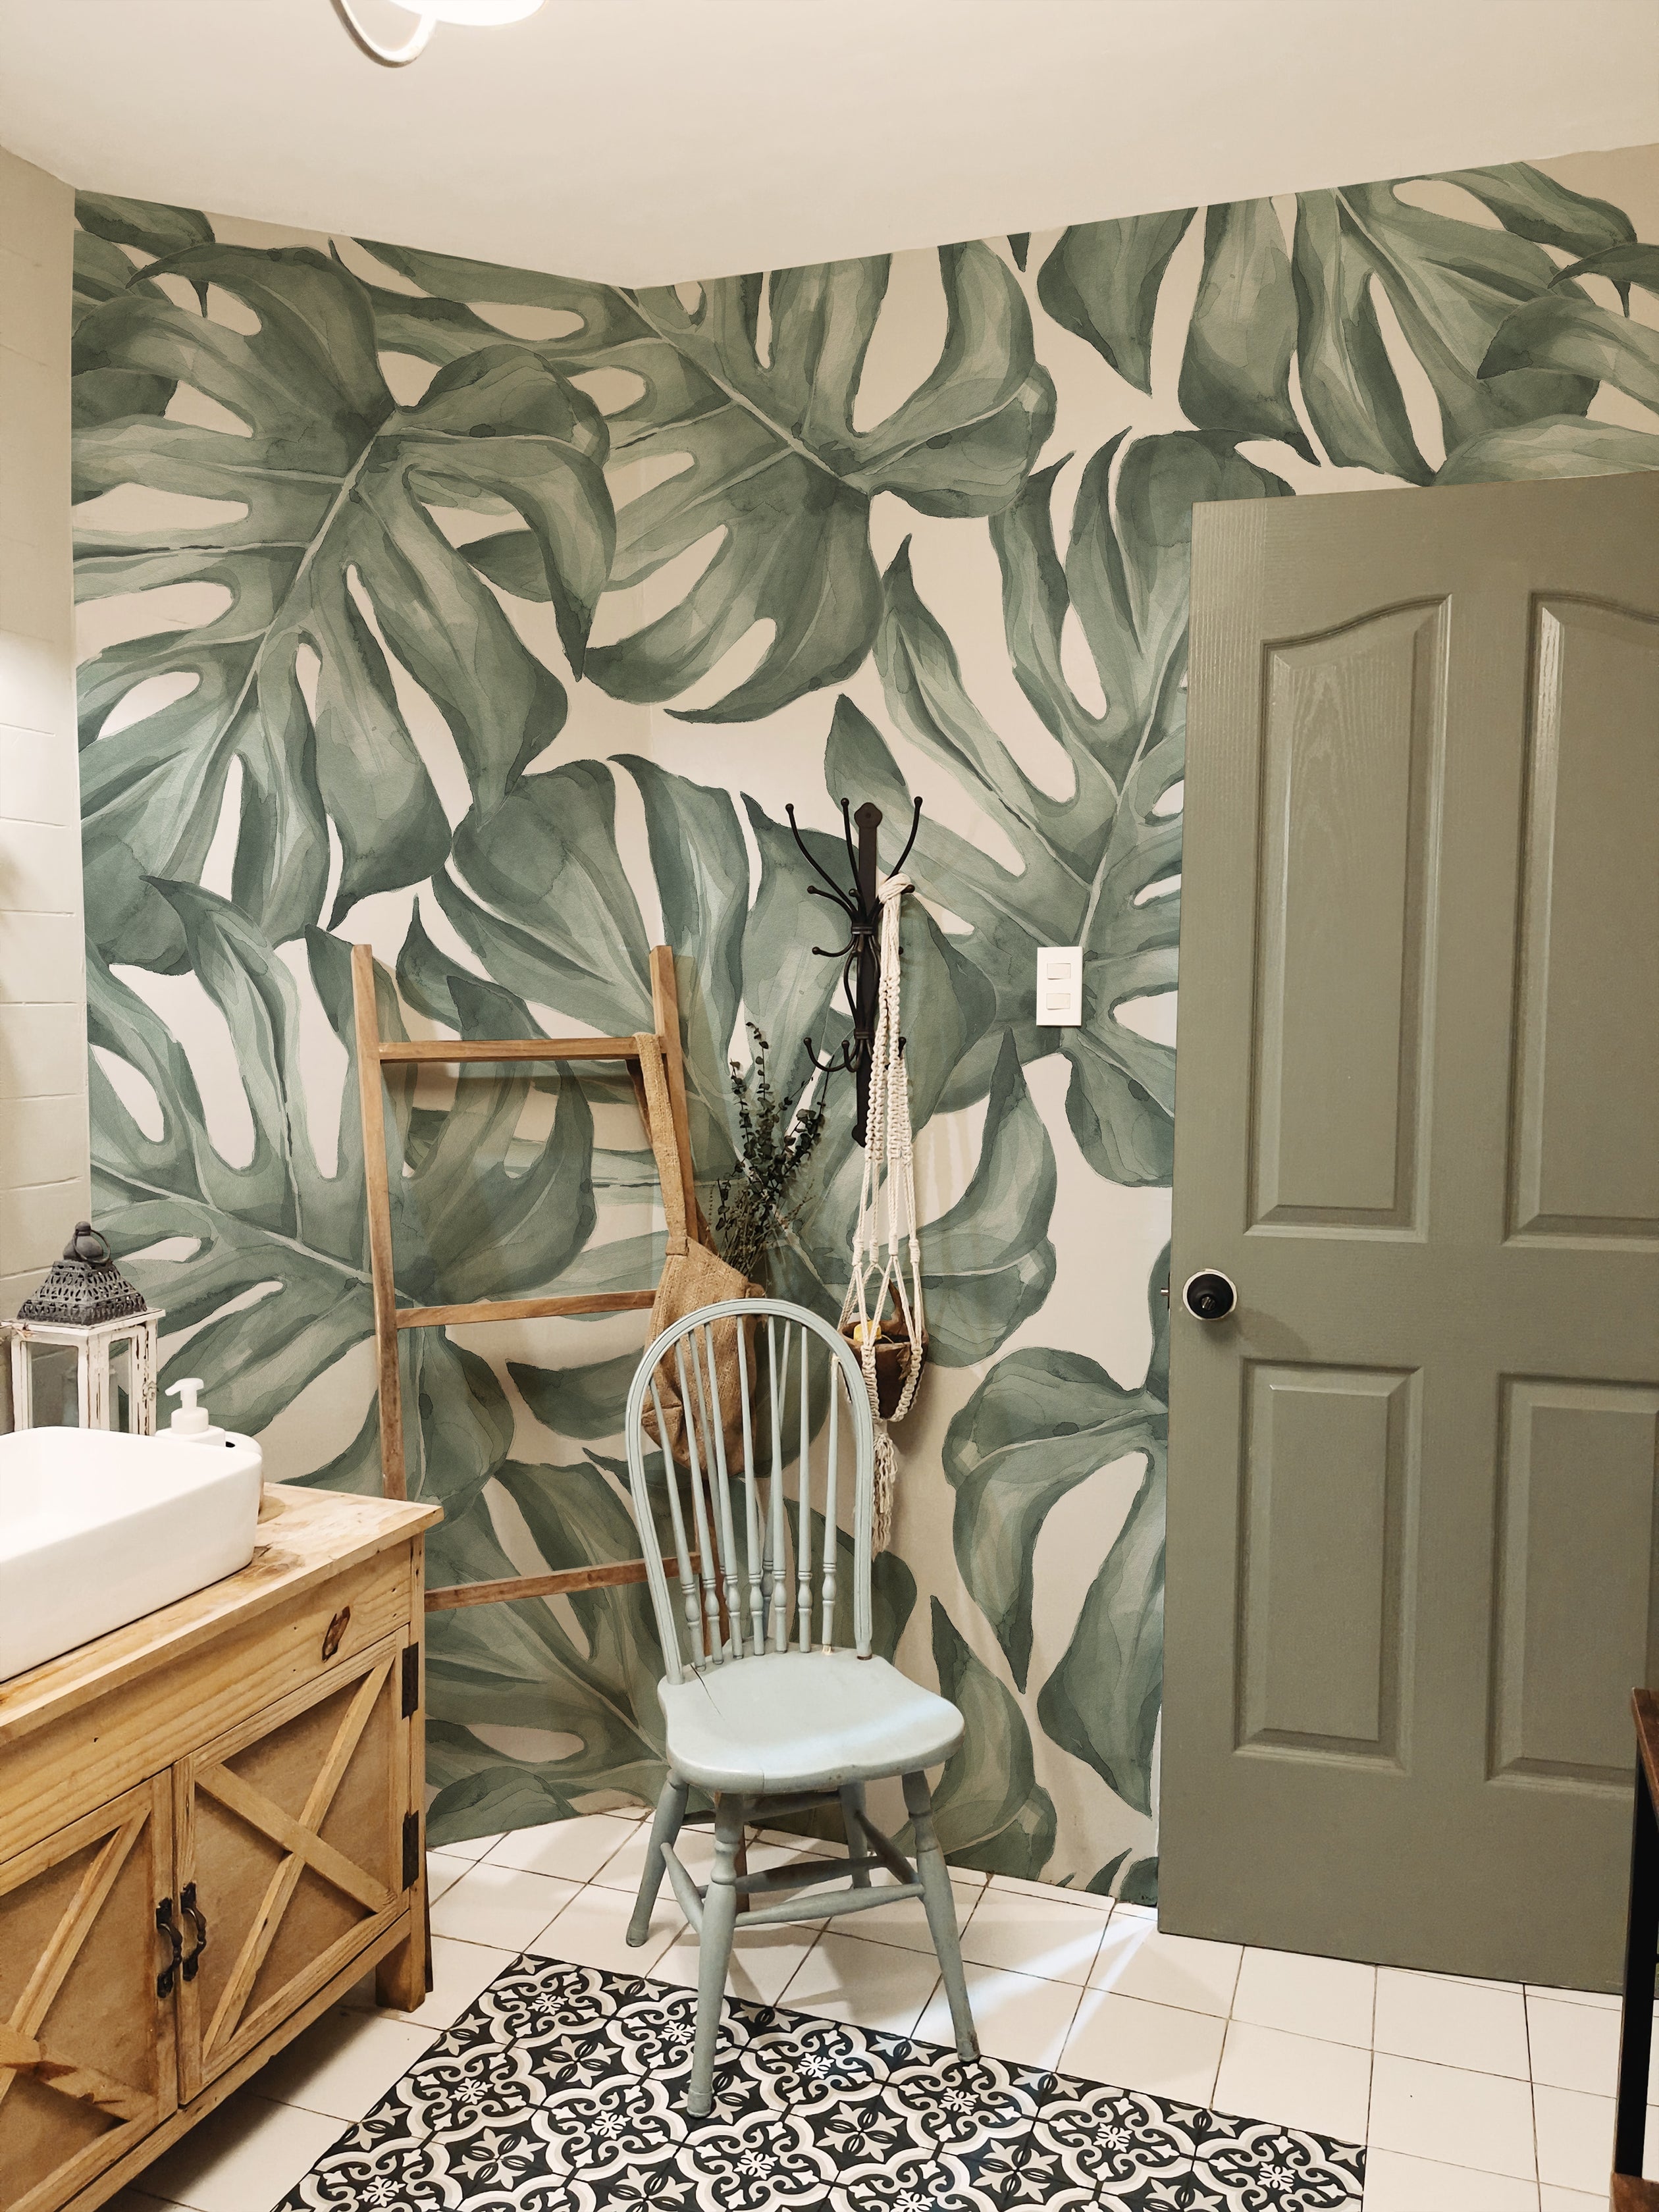 A stylish bathroom adorned with the Modern Monstera Wallpaper creating a bold and tropical ambiance. The large monstera leaf pattern dominates the space, complementing the wooden bathroom vanity and a light blue chair. Accessories like a woven basket and rustic elements enhance the natural, organic feel of the room.